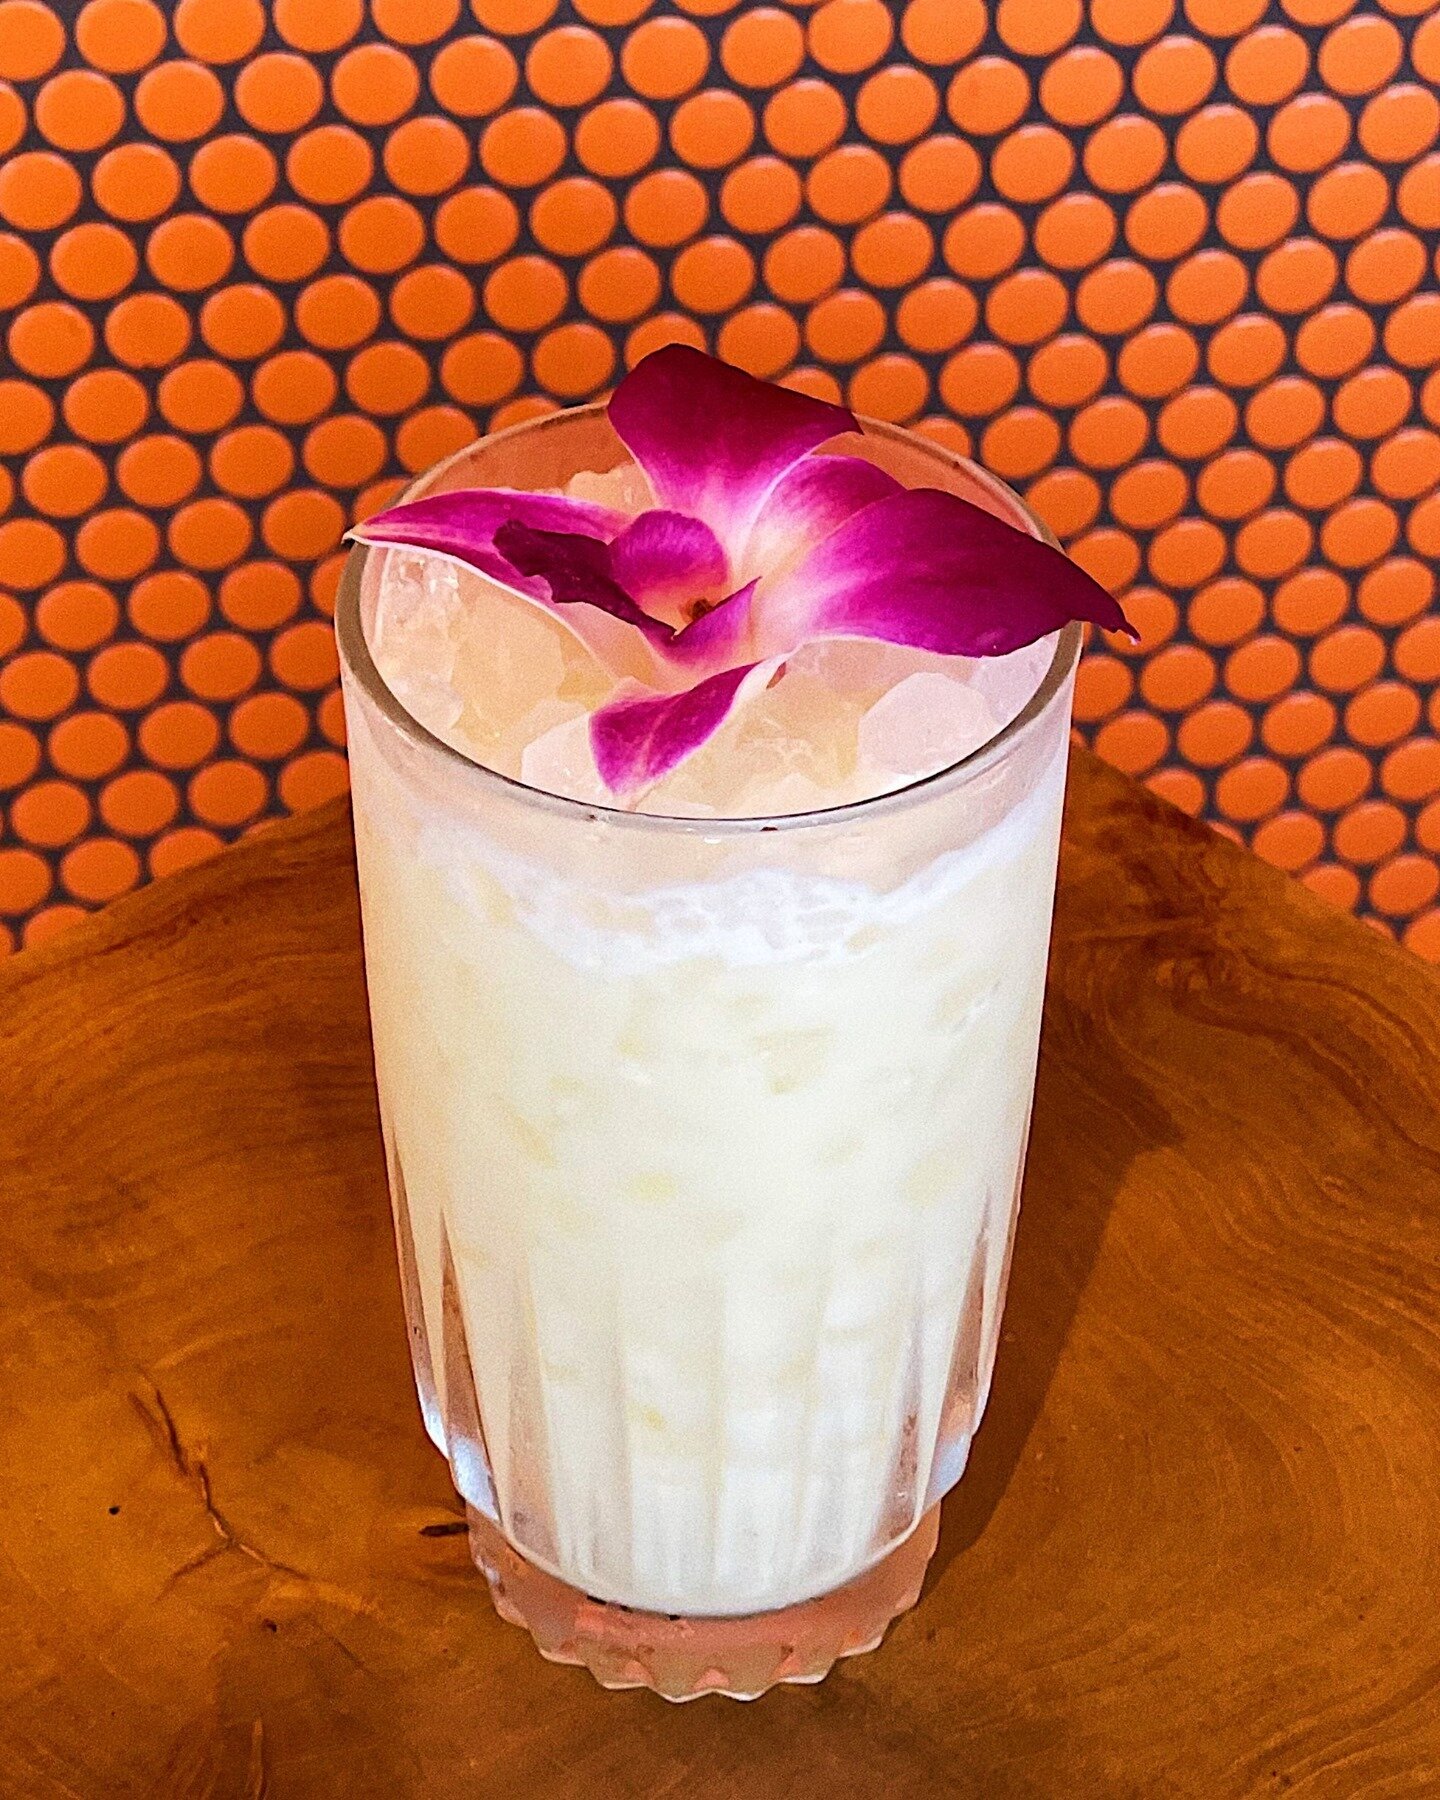 @monarchdelmar is celebrating Tom Selleck's birthday this Friday with a special cocktail! Meet The Selleck: Rum Haven Coconut Rum, Pineapple Juice, Pandan Syrup, Heavy Cream, Orange Juice, Lime Juice #VisitDelMar